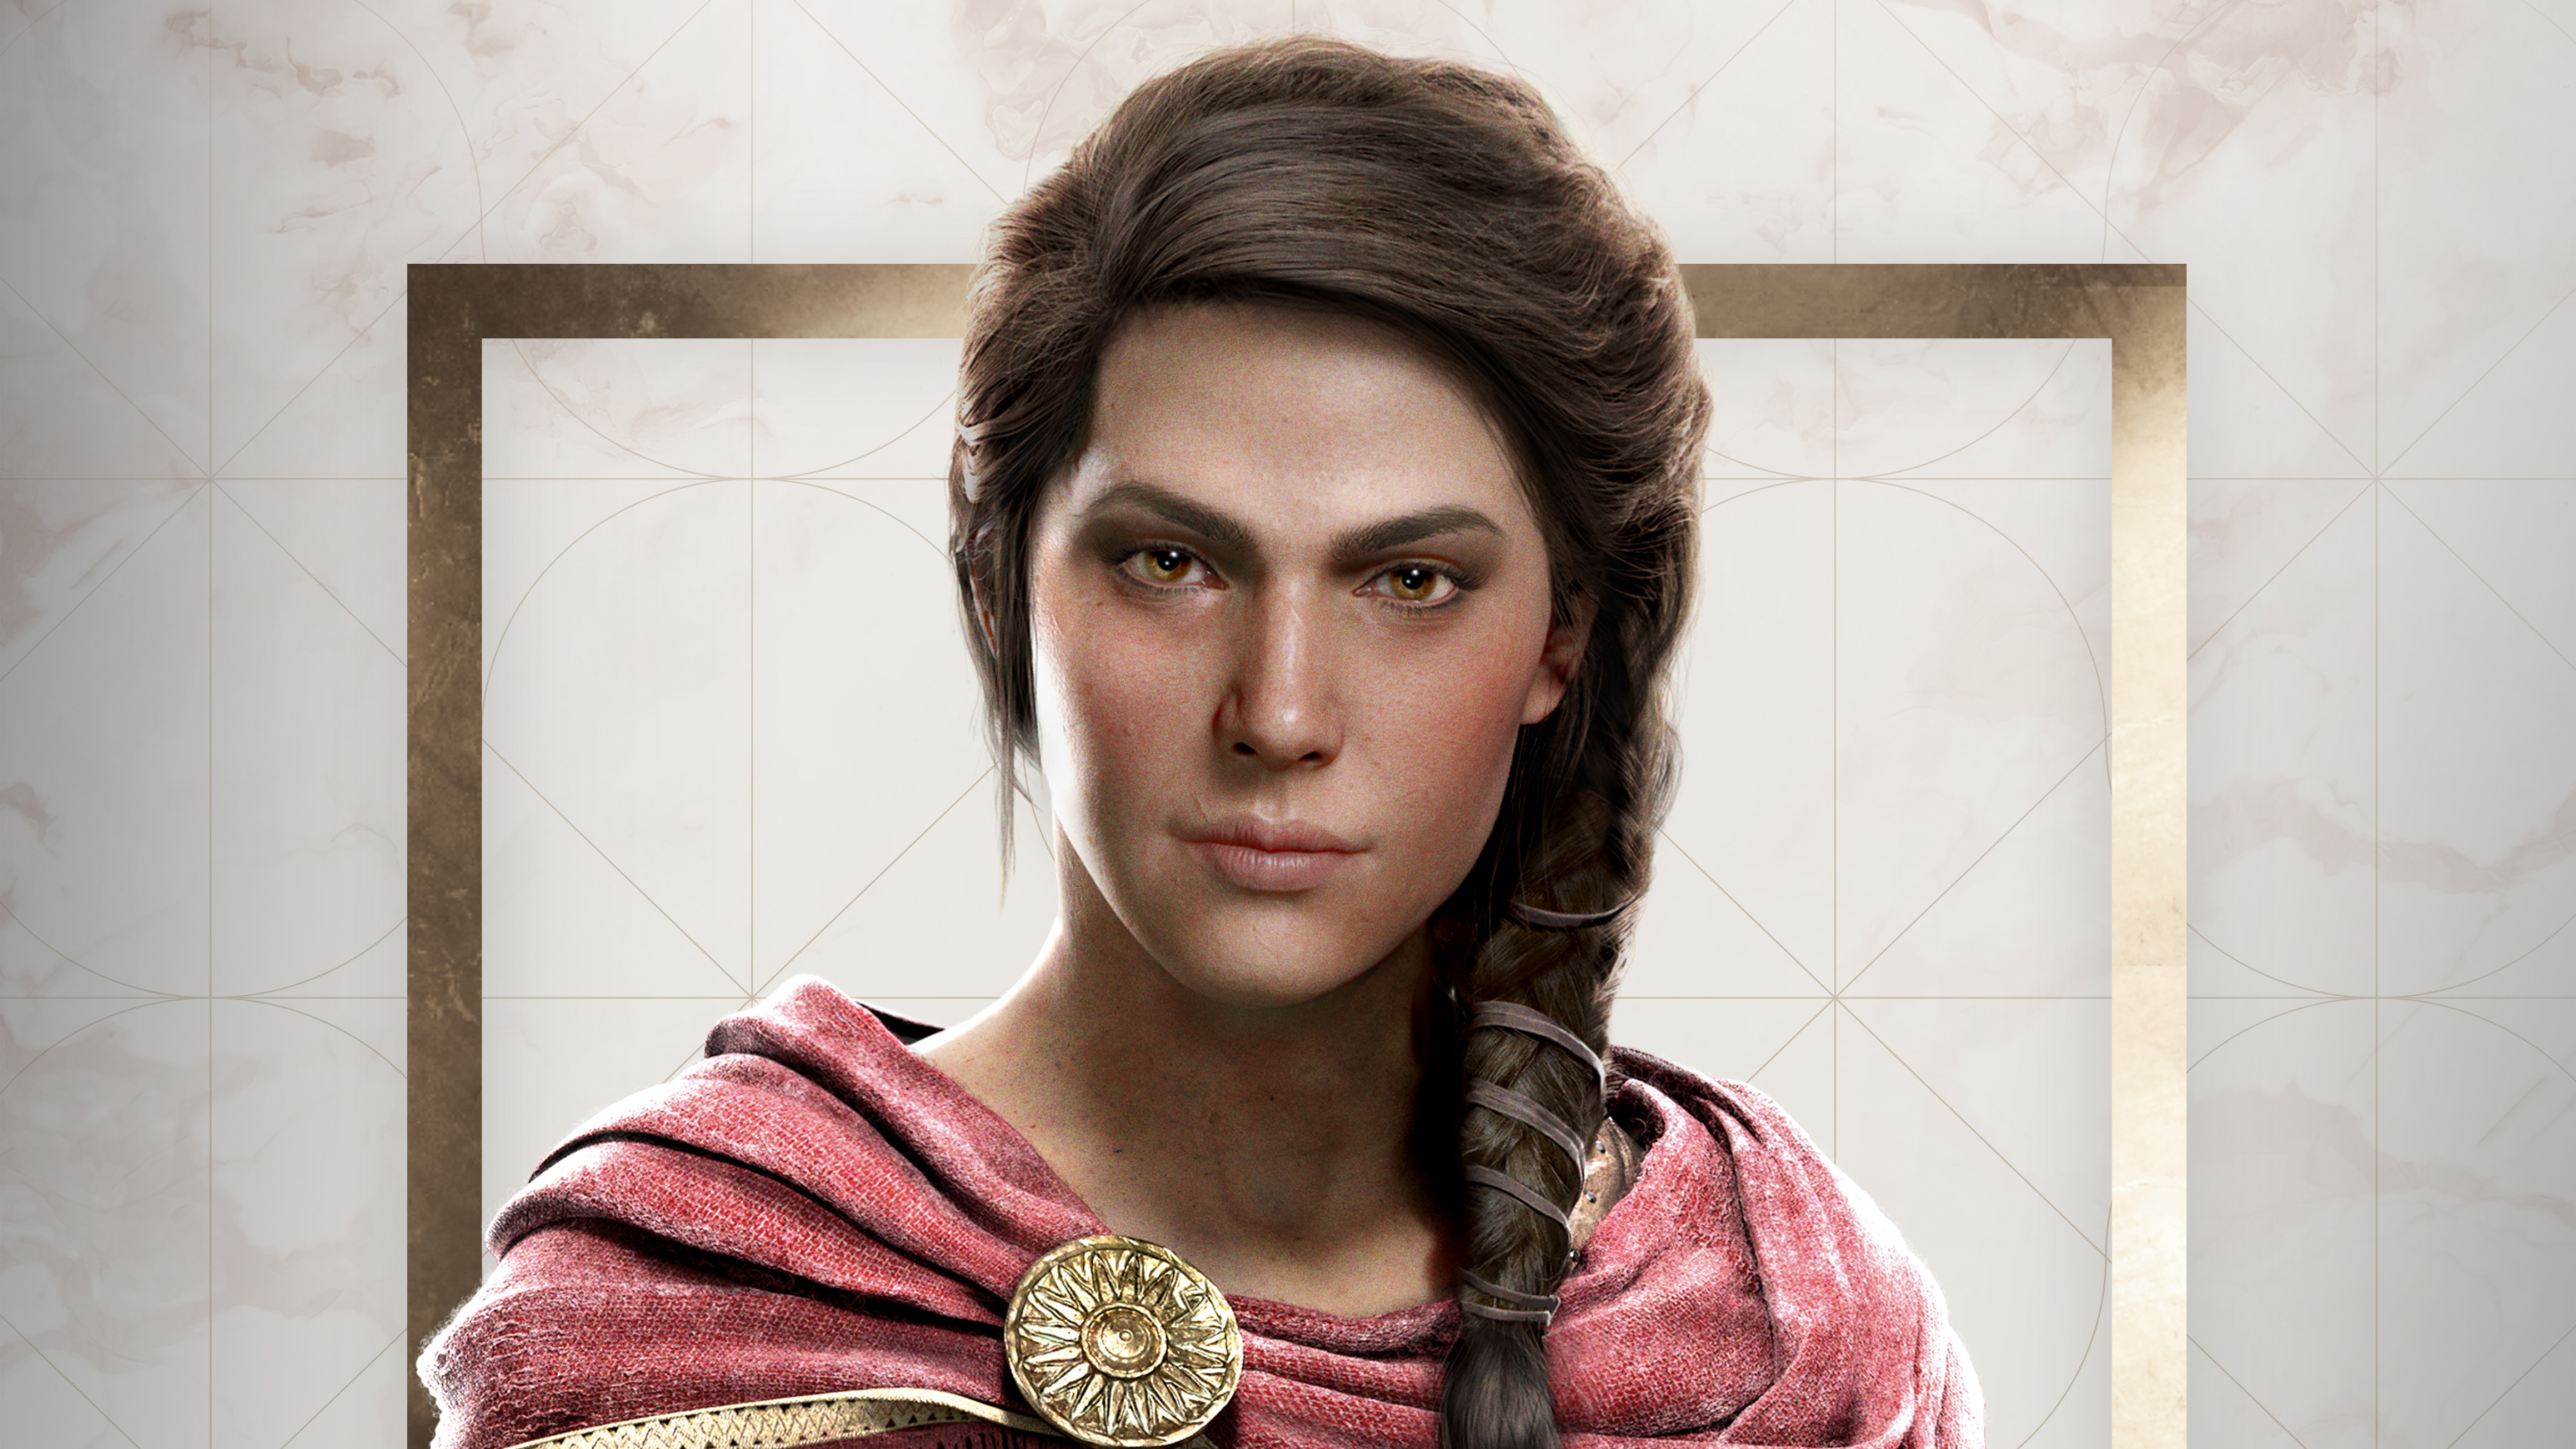 Kassandra Assassins Creed Odyssey 4k Hd Games 4k Wallpapers Images 71280 Hot Sex Picture